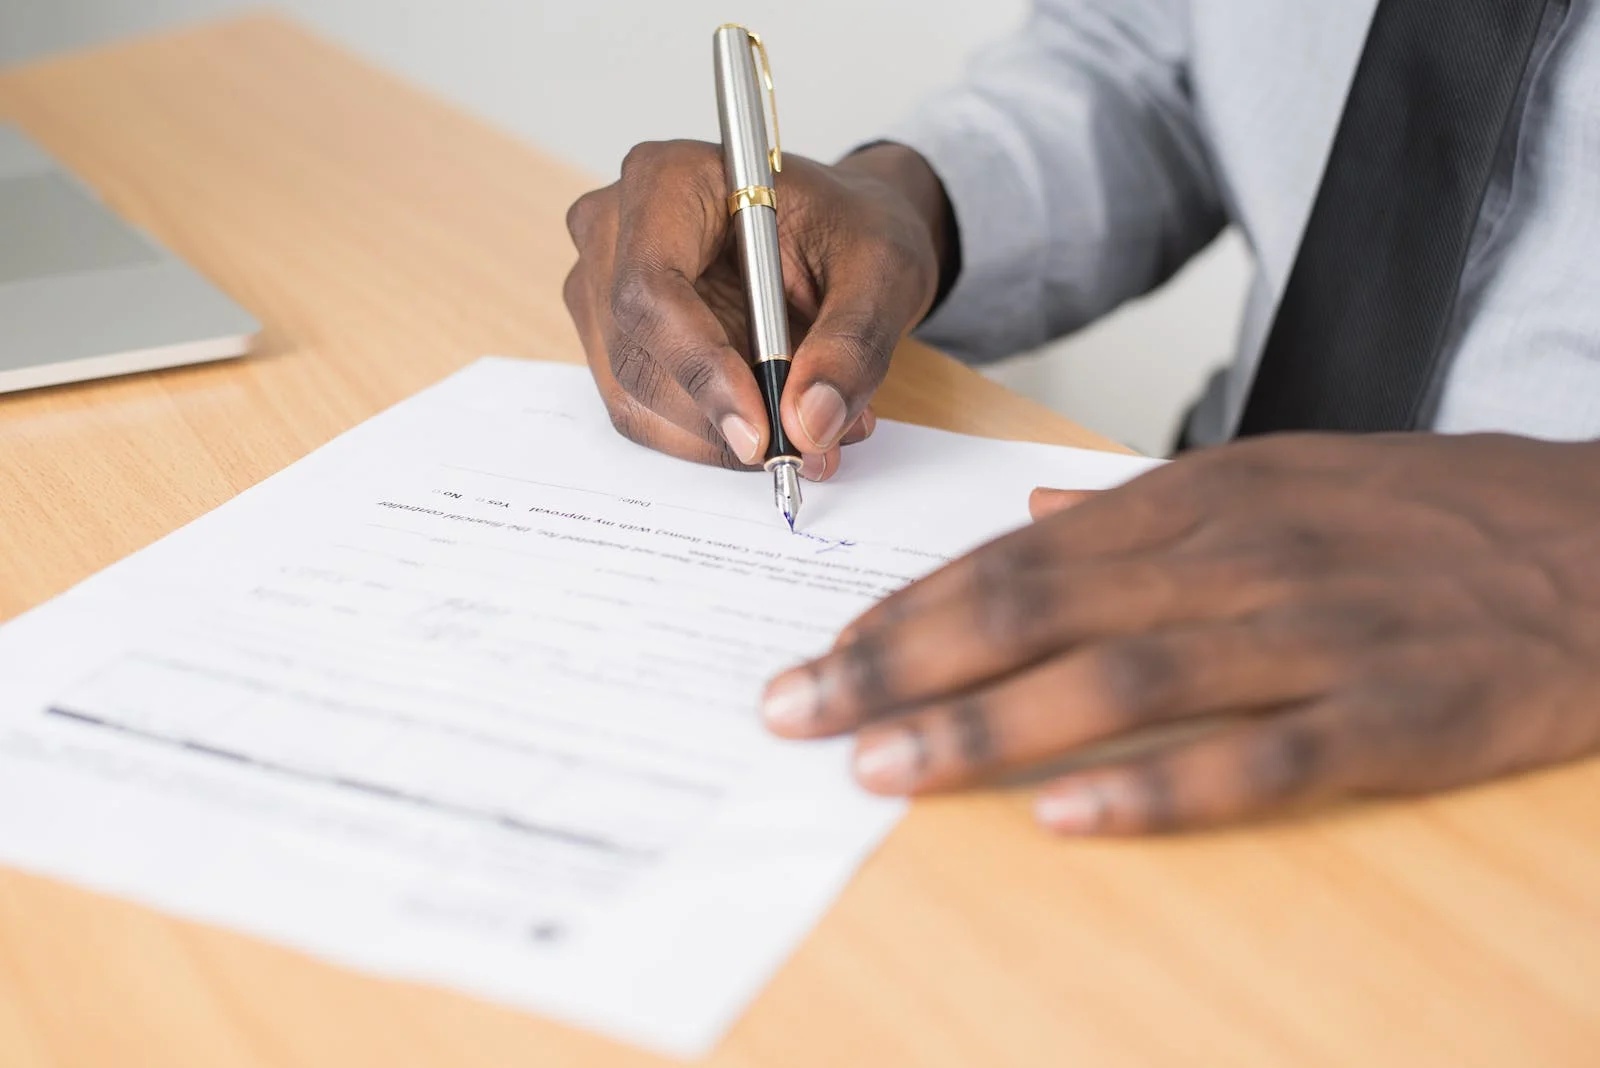 This is an image of a person signing a document.